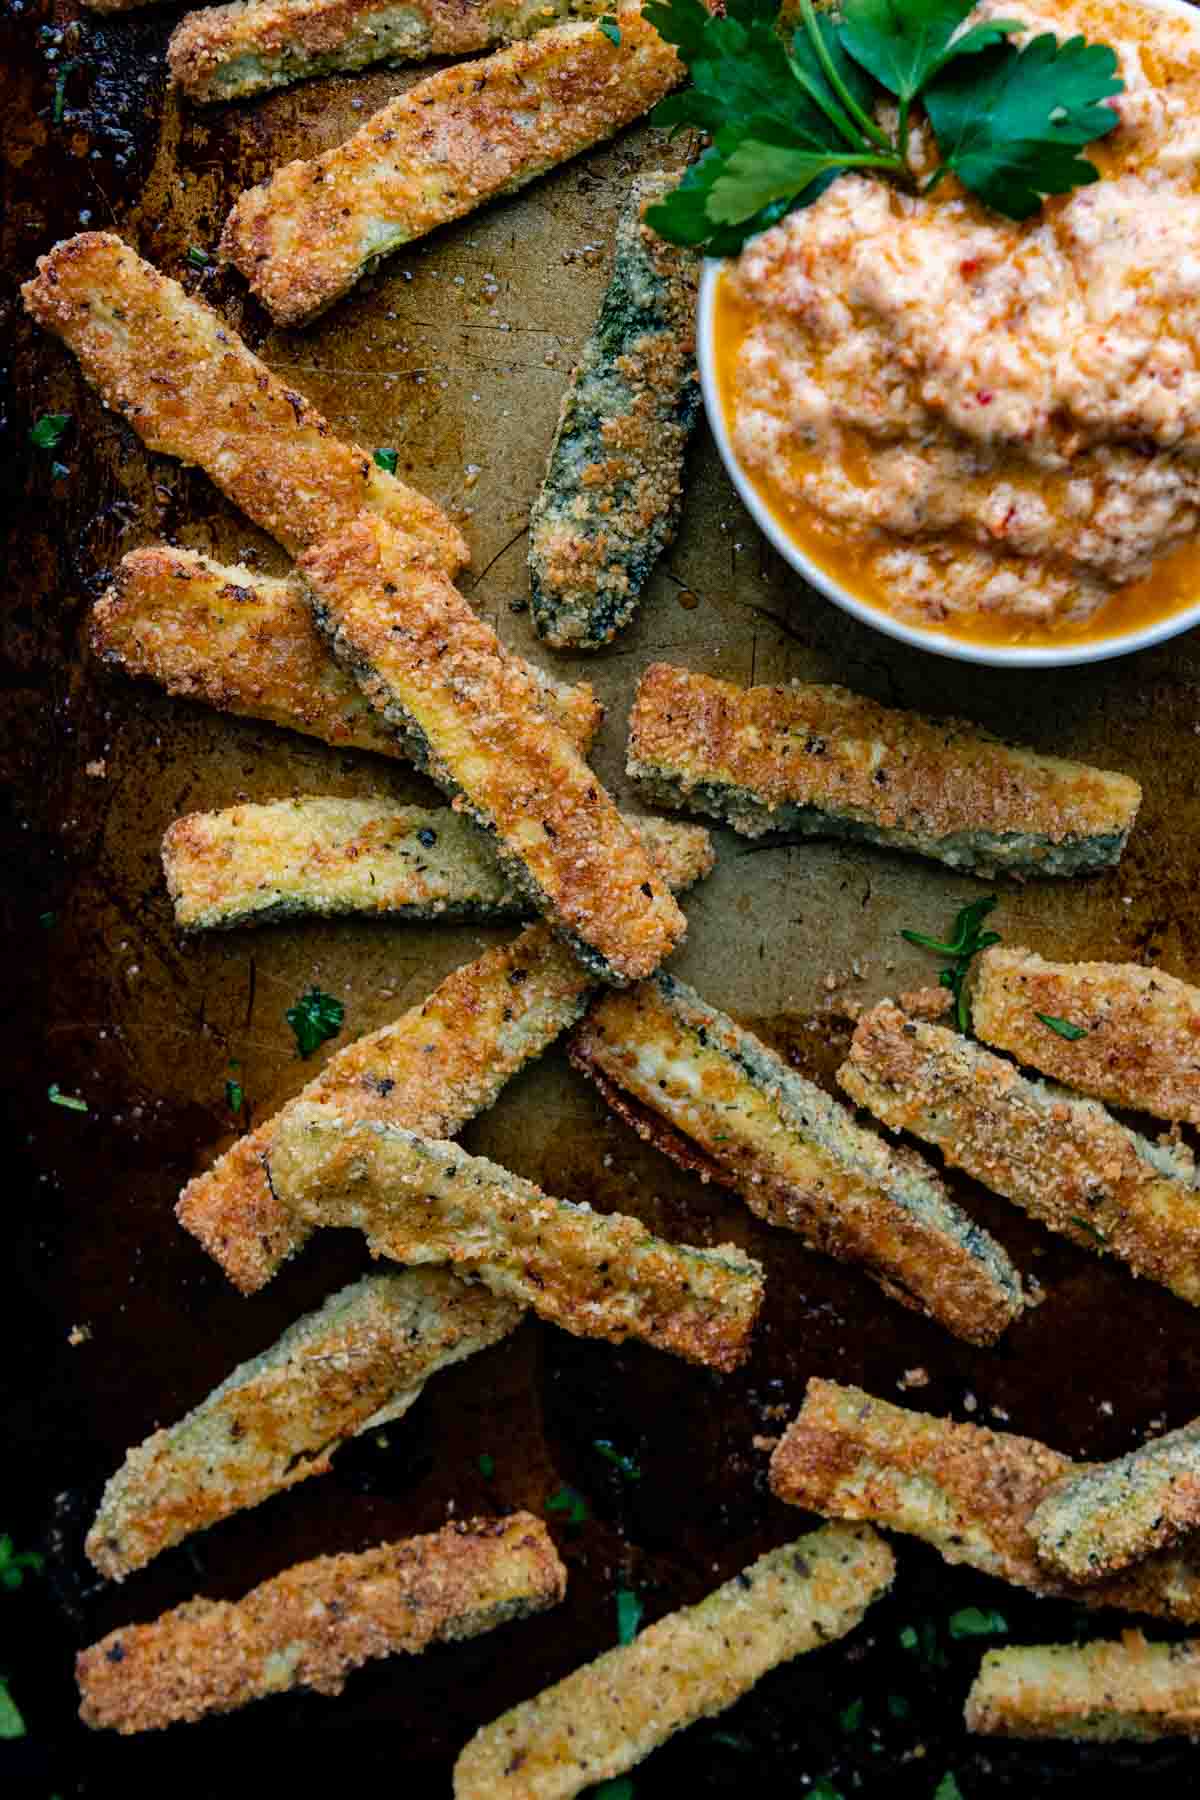 zucchini fries on a baking sheet with dipping sauce.